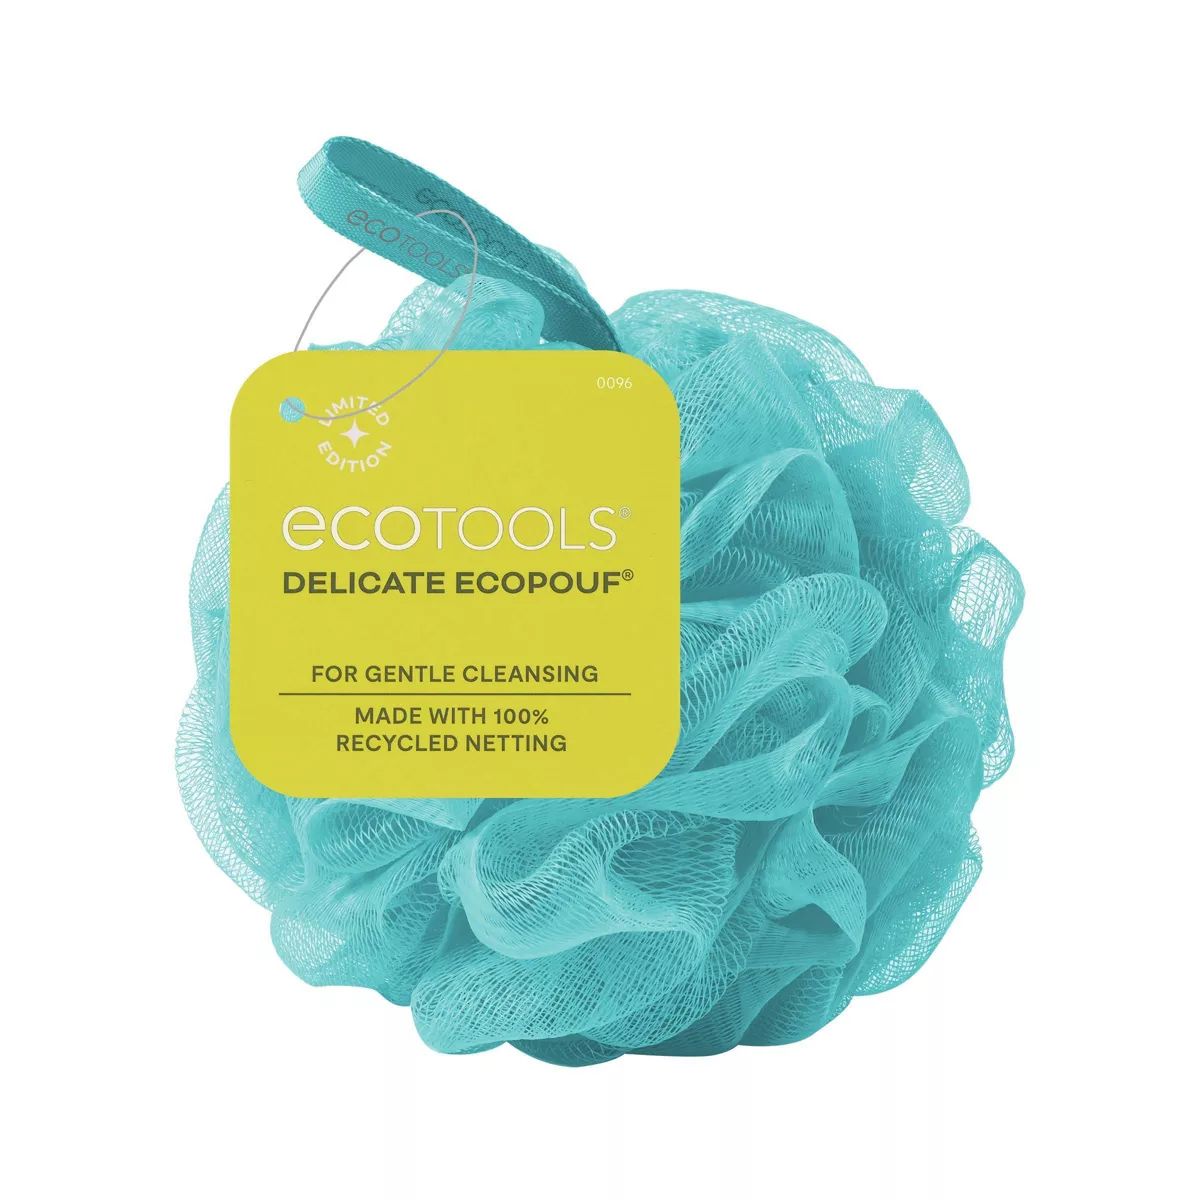 EcoTools Delicate Ecopouf Loofah - Bright Blue | Target